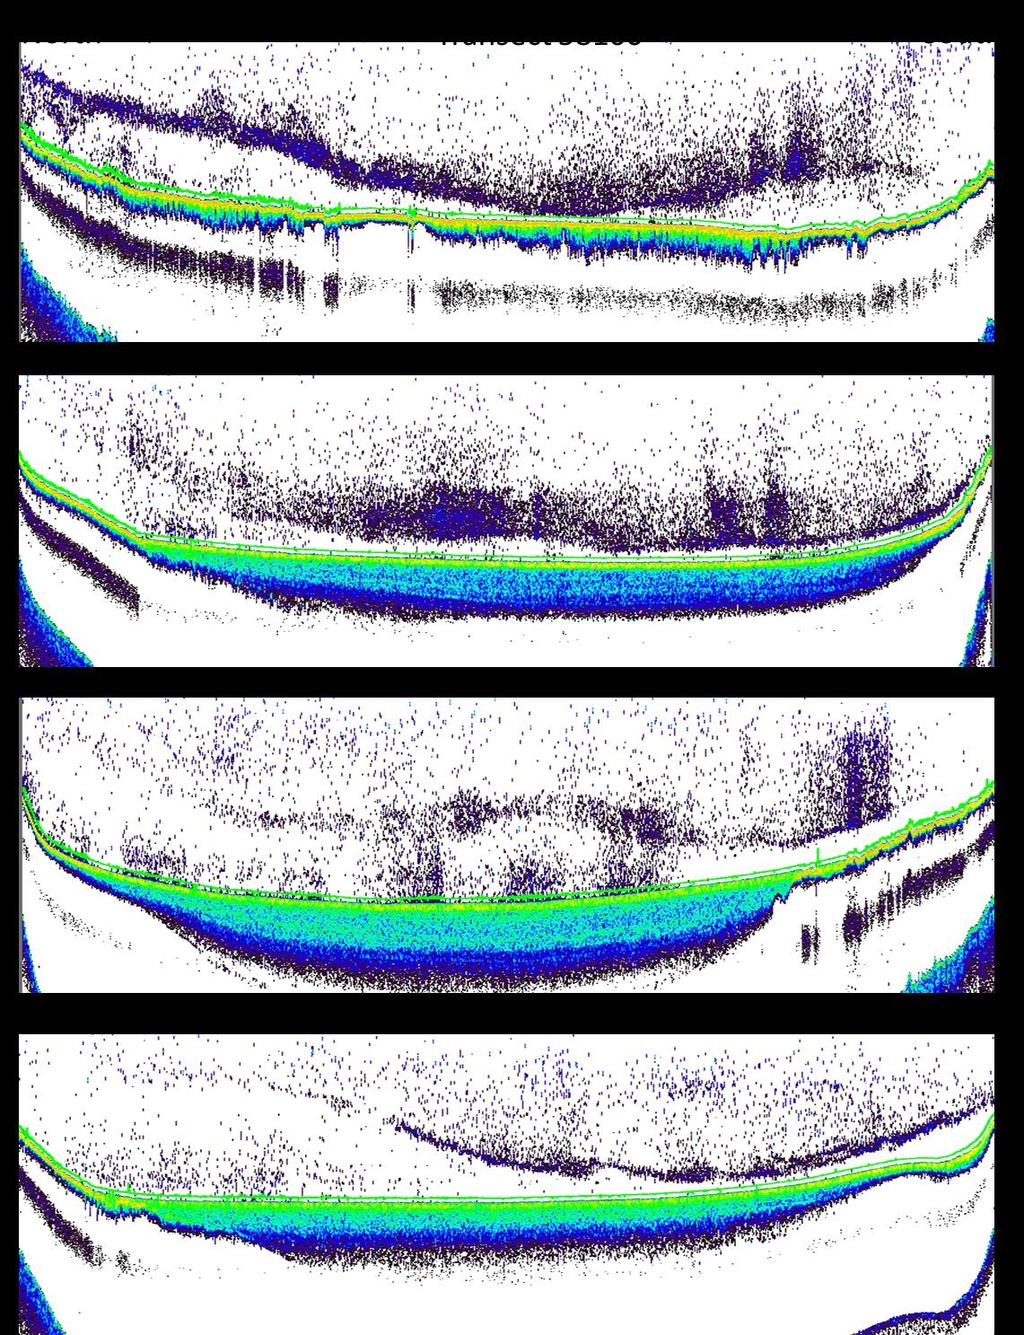 Figure 3.2.7. Echogram files generated from Echoview software version 6.